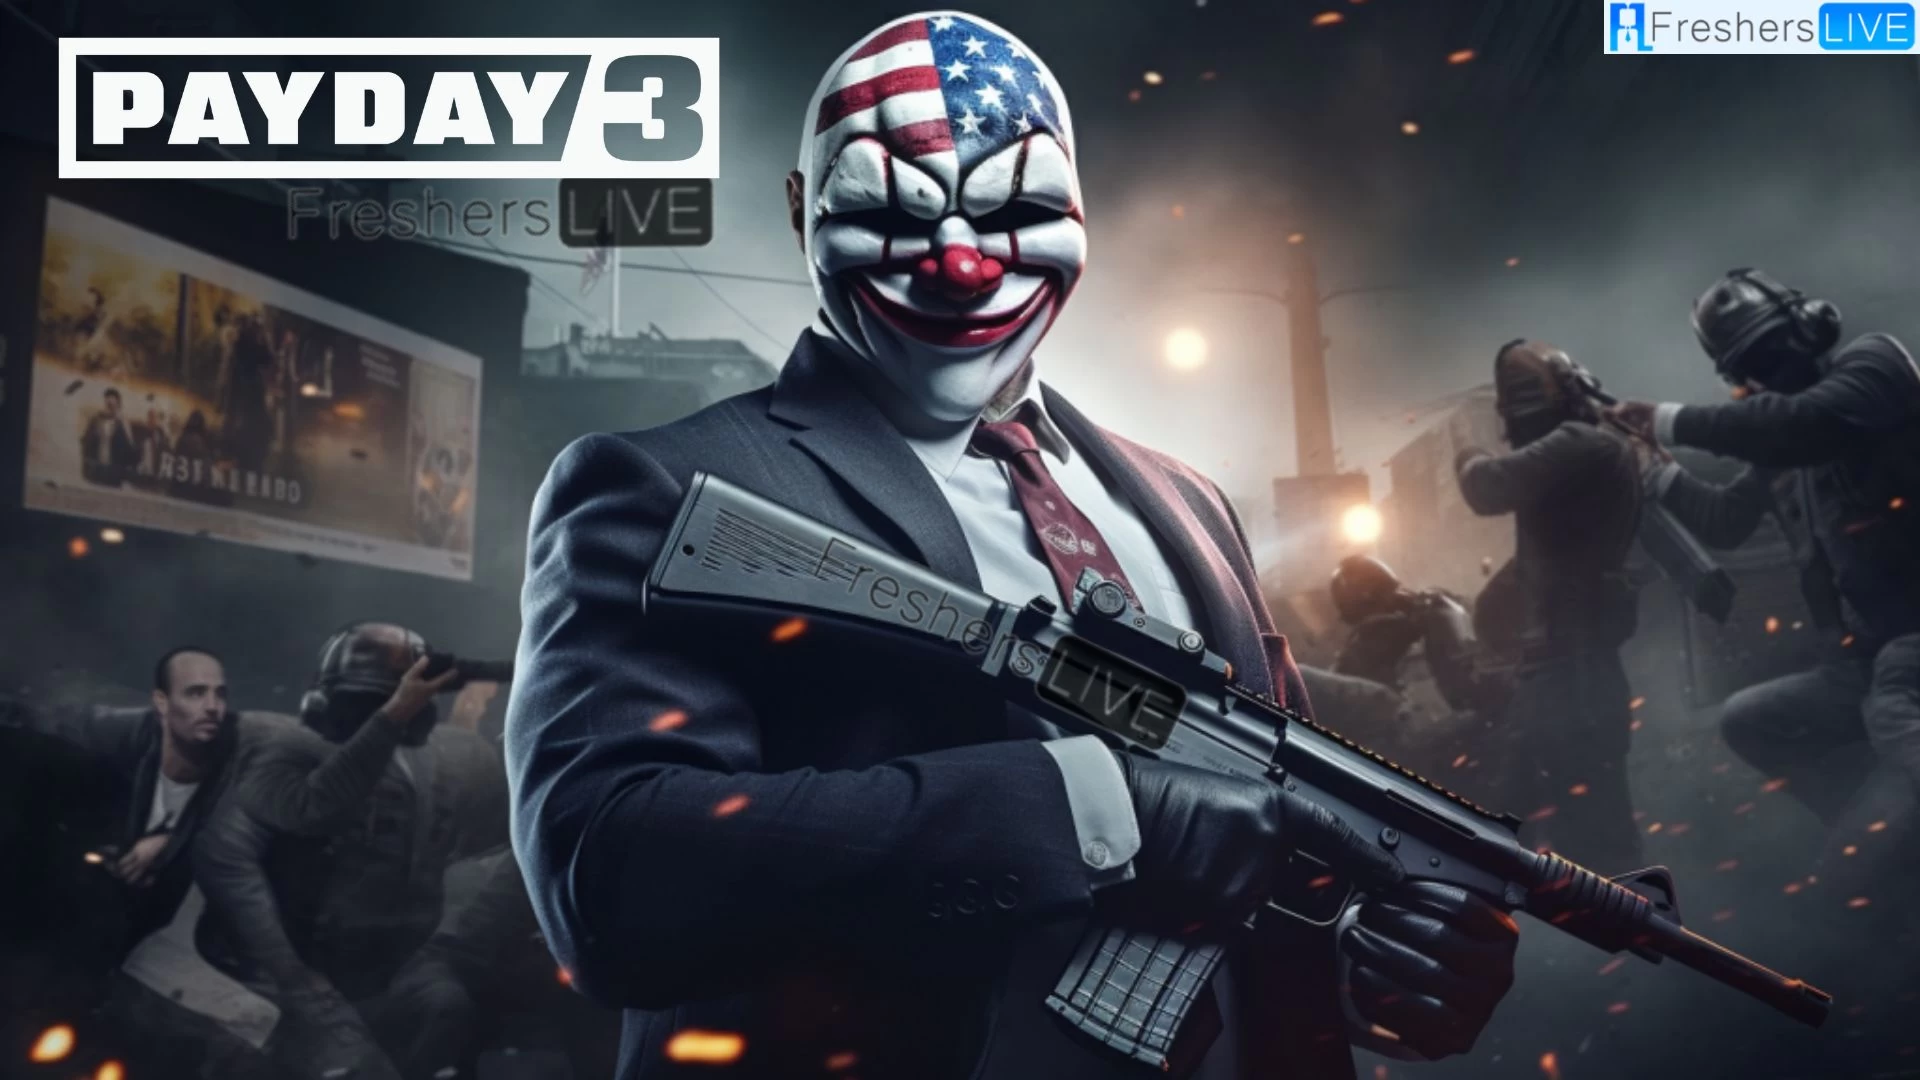 How to Install Mods in Payday 3? What are the Best Mods for Payday 3?